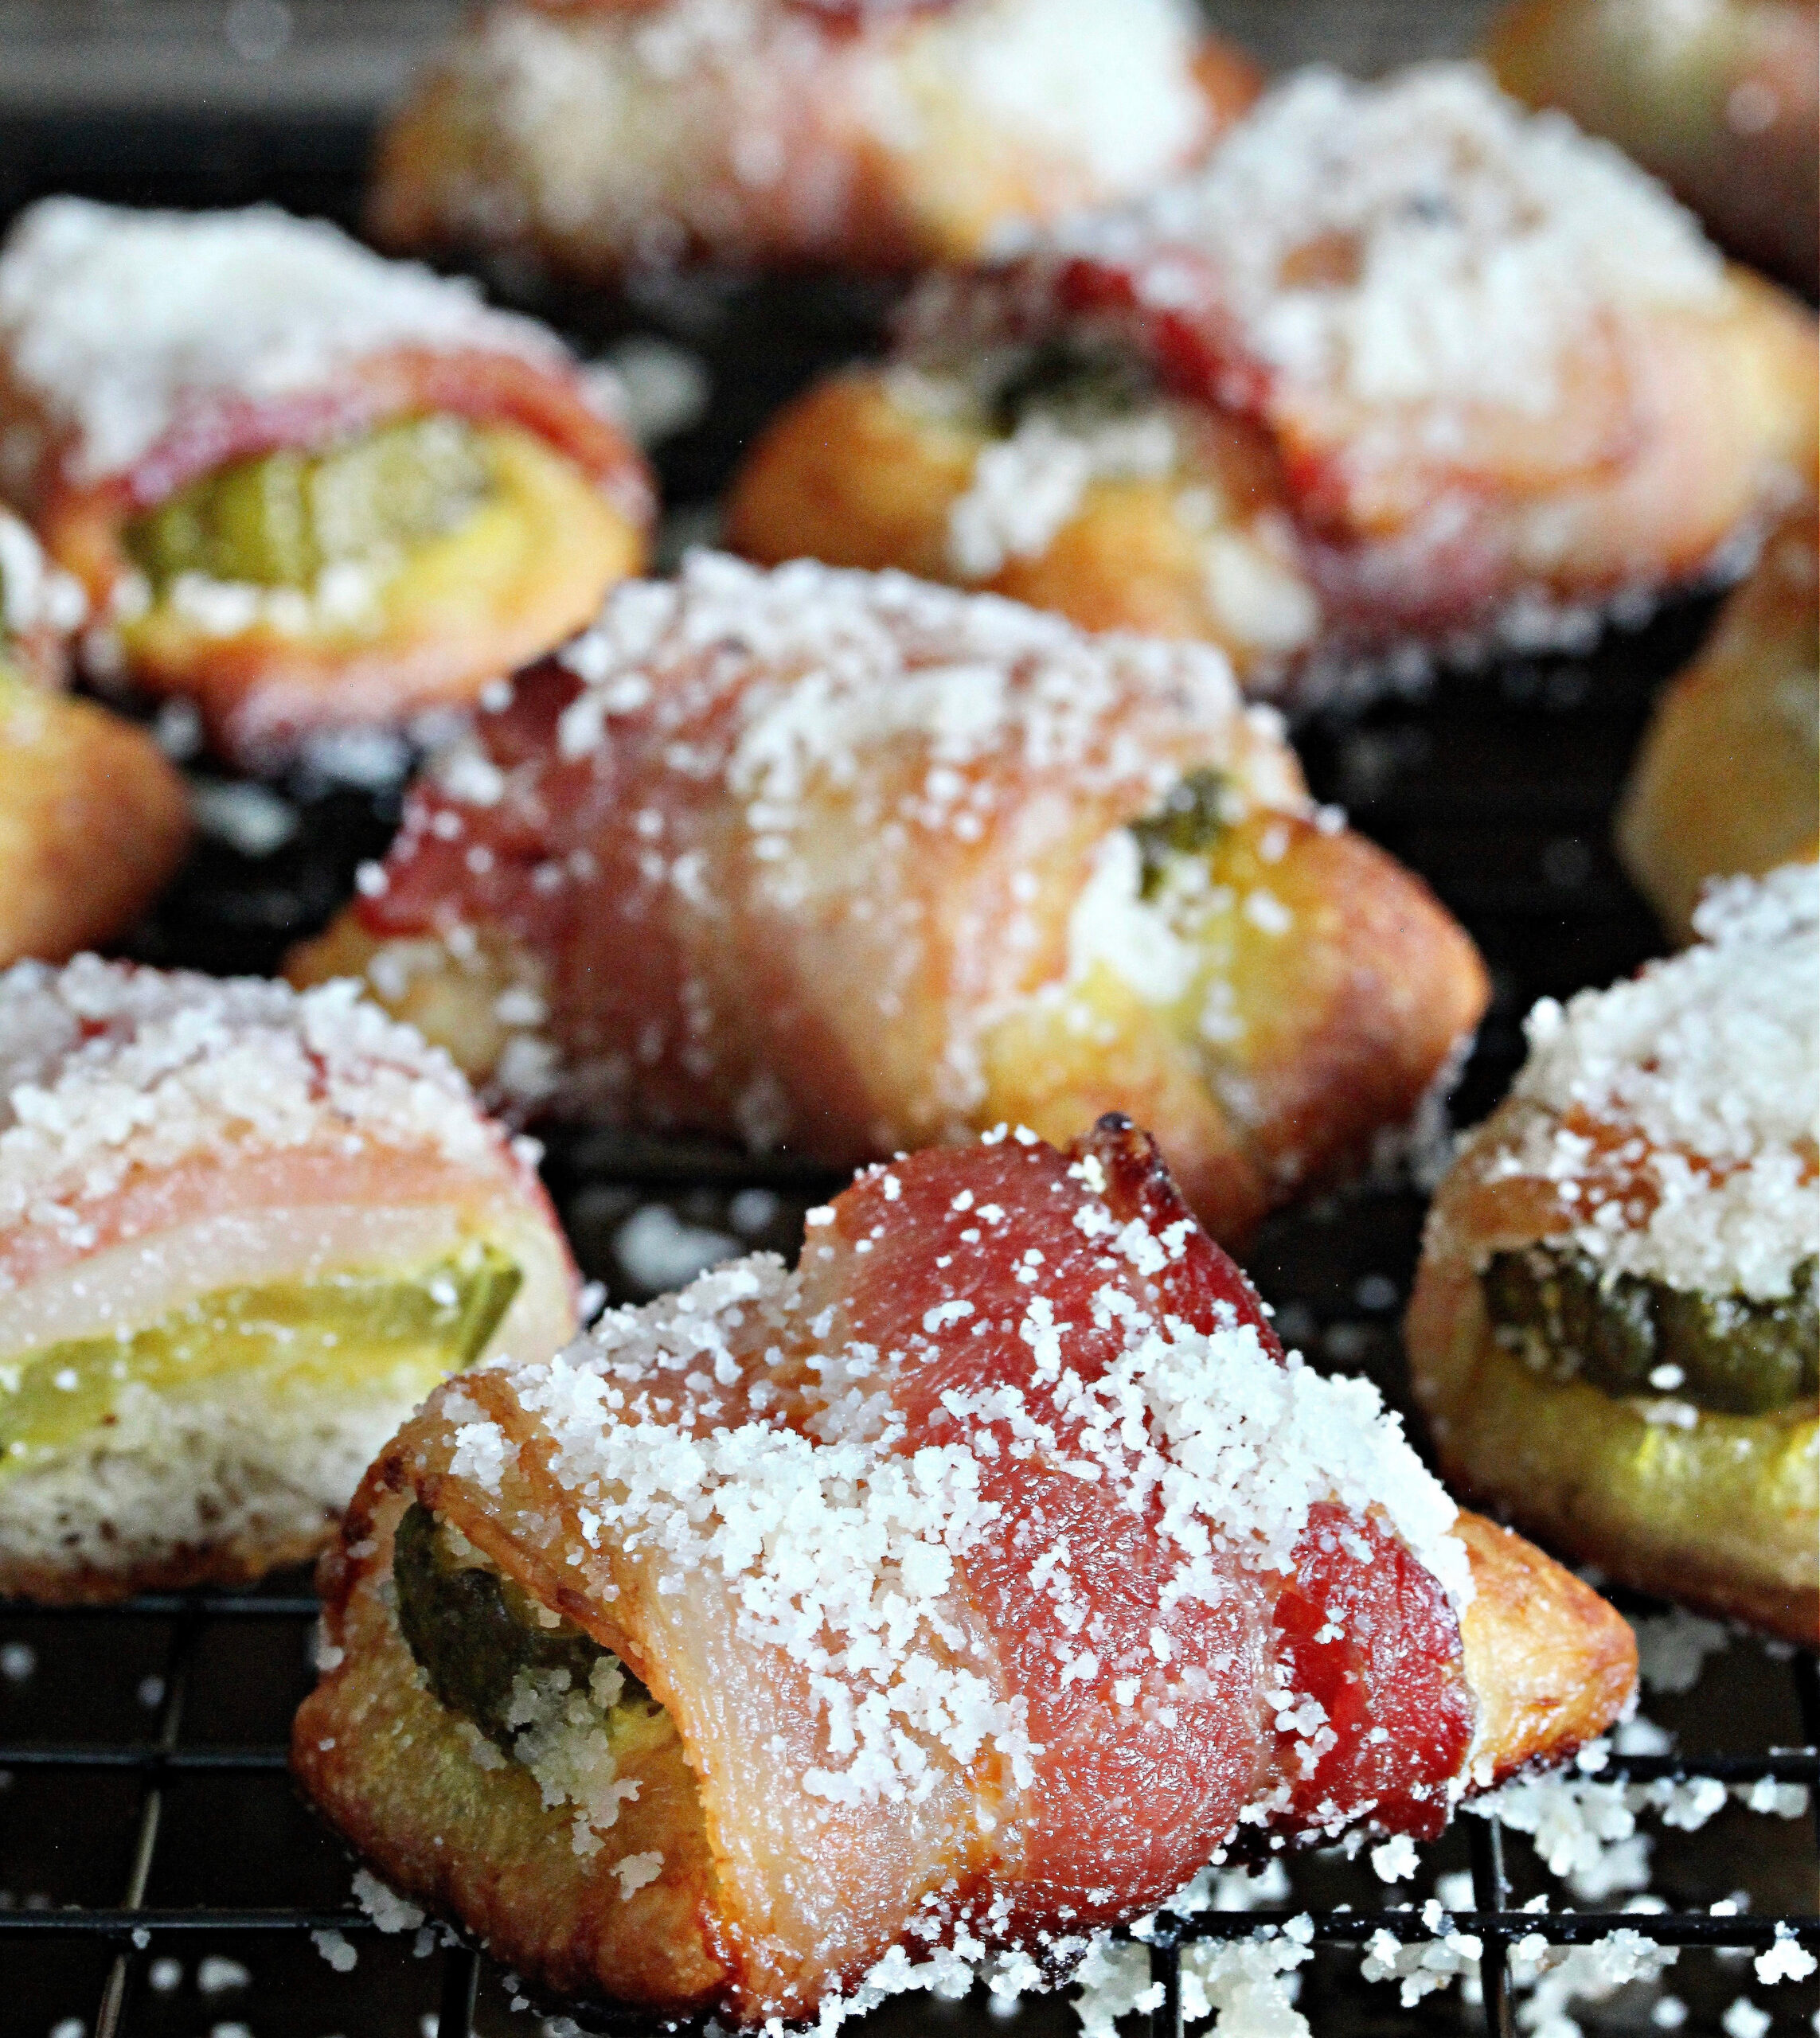 Parmesan Bacon and Pickle Bites